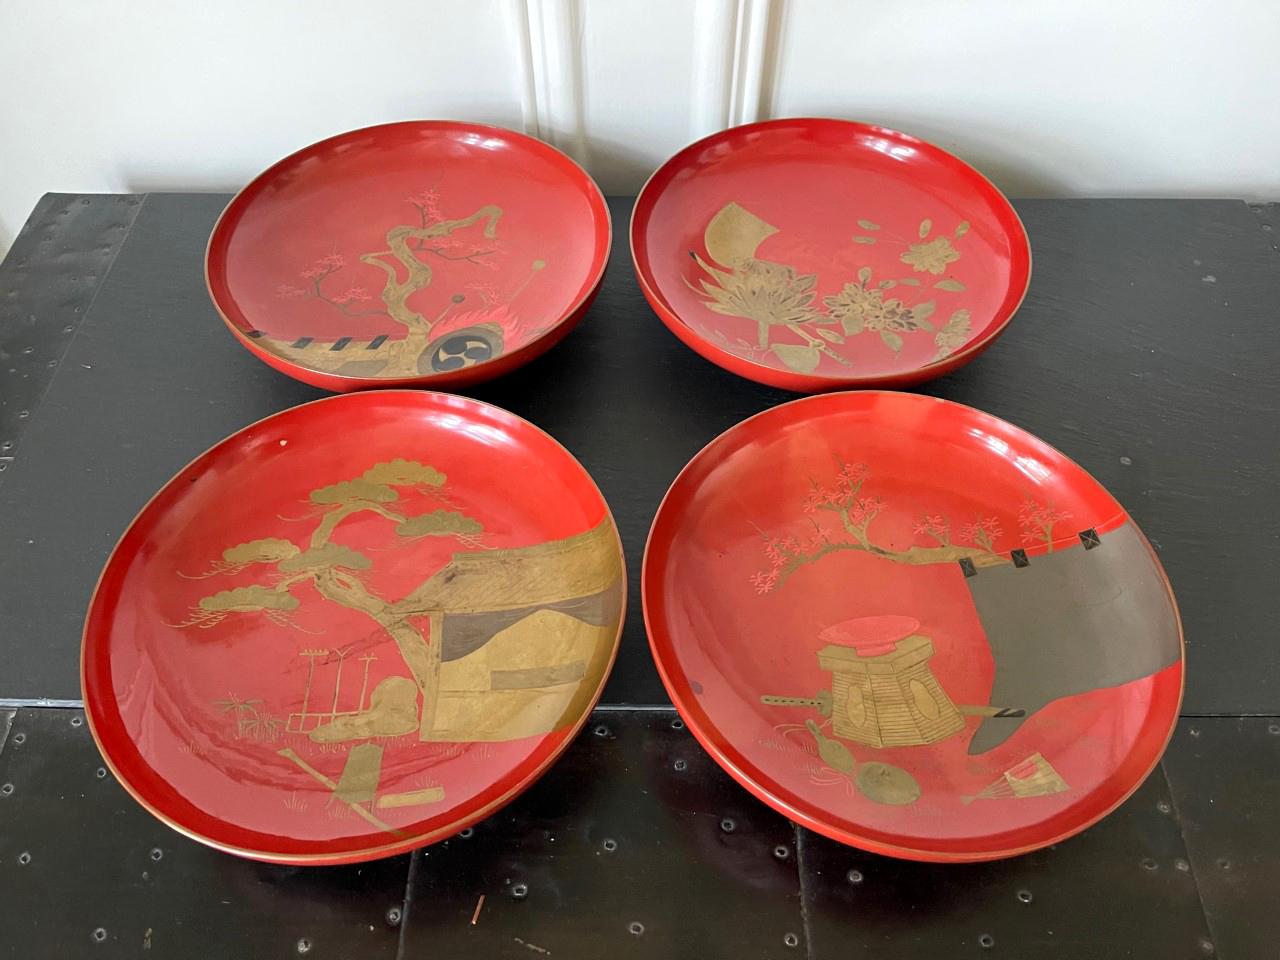 A set of four Japanese shallow footed bowls or dishes in red lacquer with predominantly gold Makie design circa 1920s-1930s Taisho period. Each was decorated with hiramakie painting of different motifs, mostly gold, black and pewter color. One with